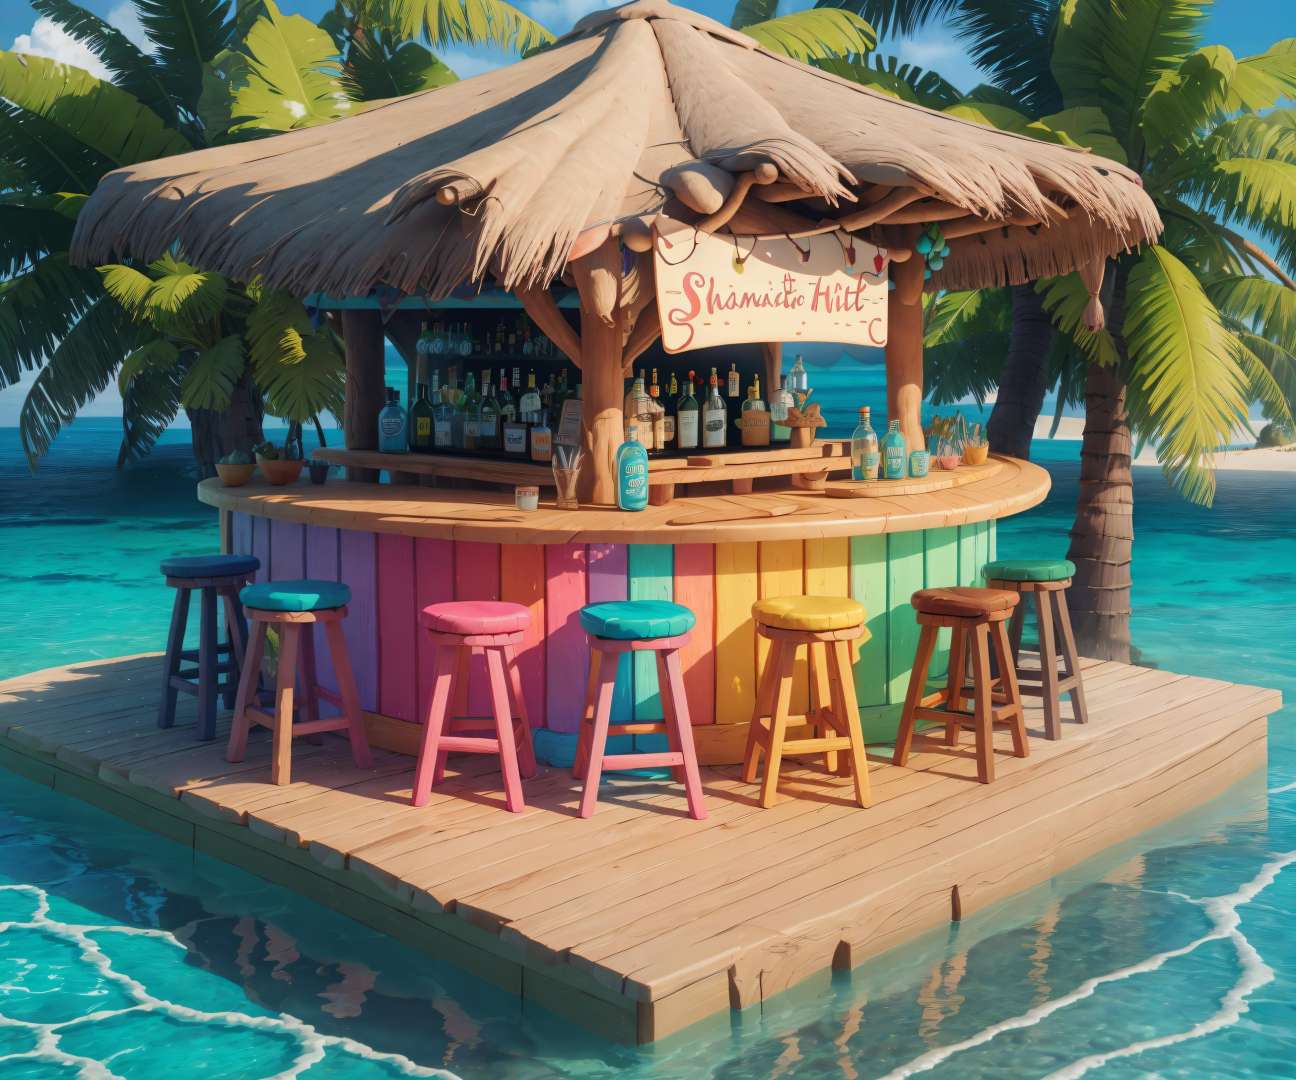 (masterpiece, best quality:1.3, 3d, highres, ultra-detailed, 8k, 85mm, centered, tilt shift, <lora:ISO_SHOP-18:0.9>, iso_shop, (isometric:1.3),  food, bottle, ocean, water, fish, cooking, cutting board, (small details), (extremely detailed), [hyperrealistic:0.2], bloom, (colorful), [[[sky]]], (sign:1.2), fish shop,  vivid, (UHDR), sunlight, (tropical), cute, [pastel colors], vivid, cinematic, [film grain:0.7], [table, chair], [small decorations], [beer:0.5], [bowl], [flower:0.4], tiki hut, bar, multicolored theme, natural lighting, dreamy, reflection, water, nature